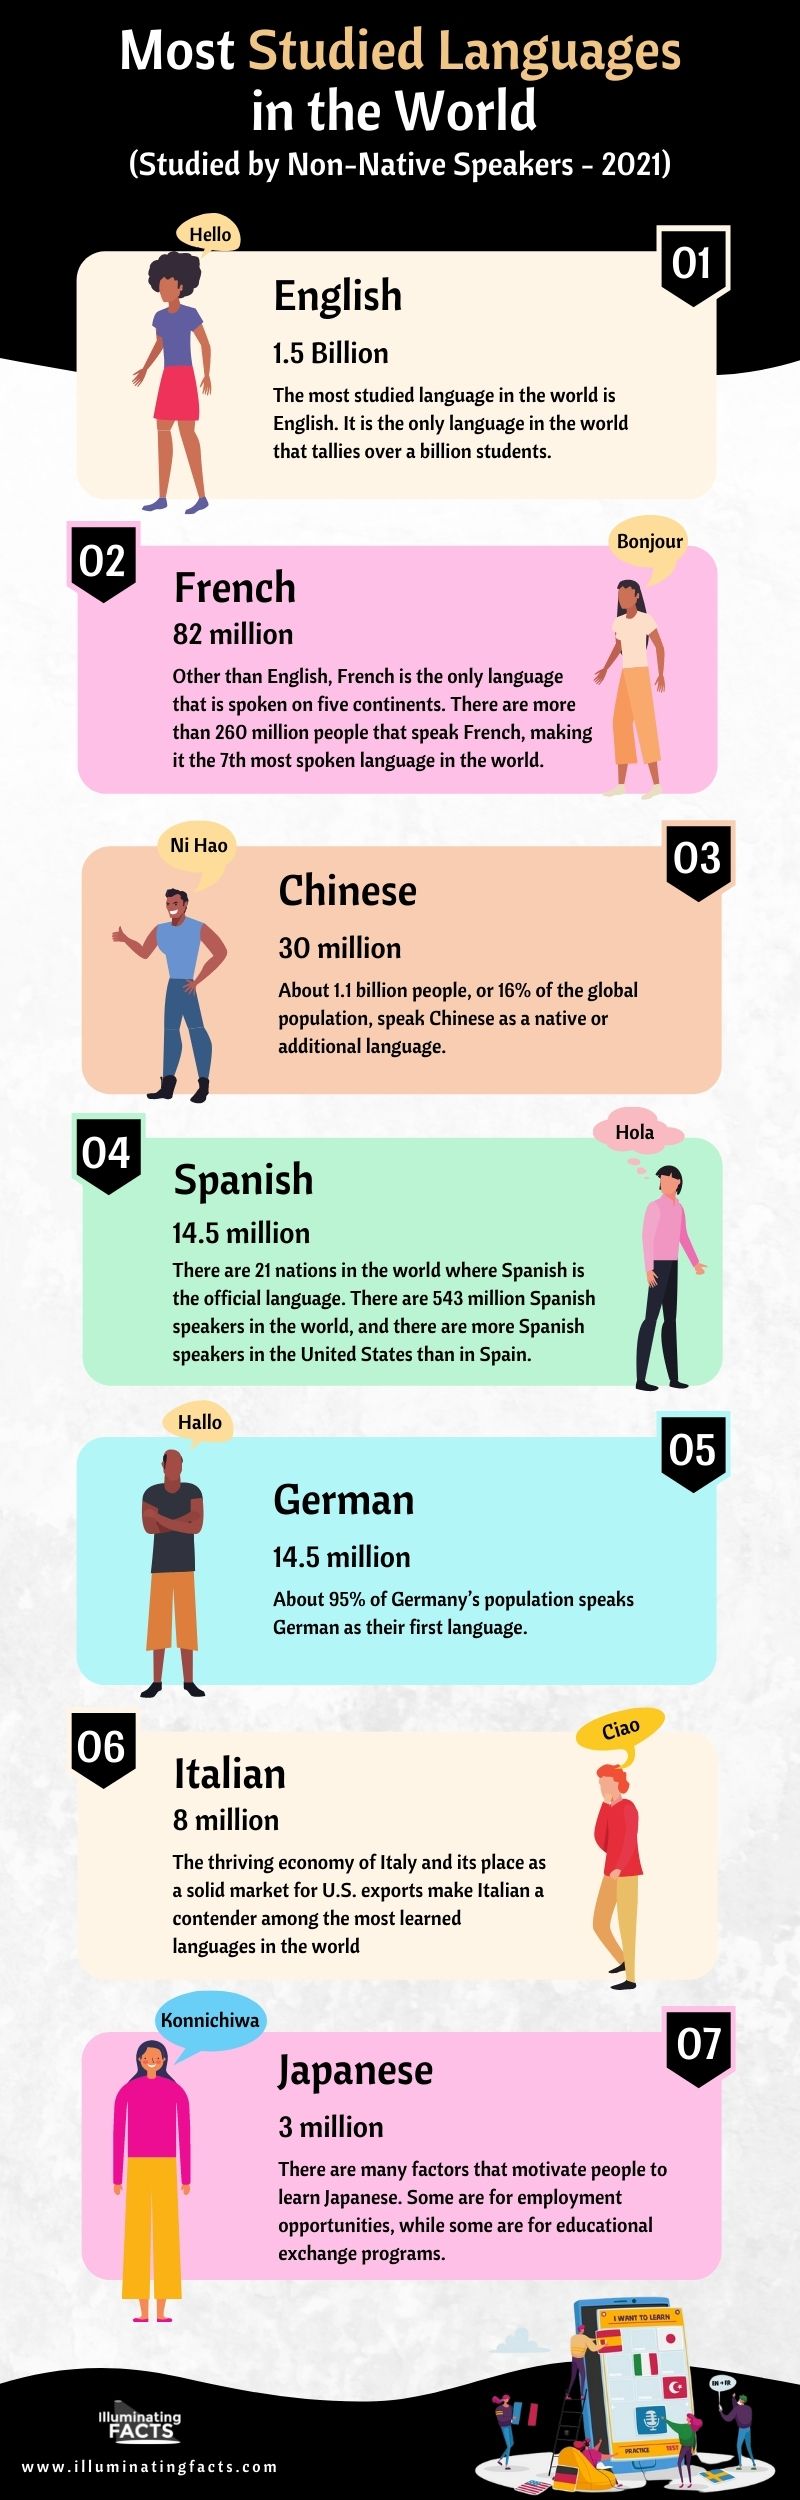 Most Studied Languages in the World (2021)